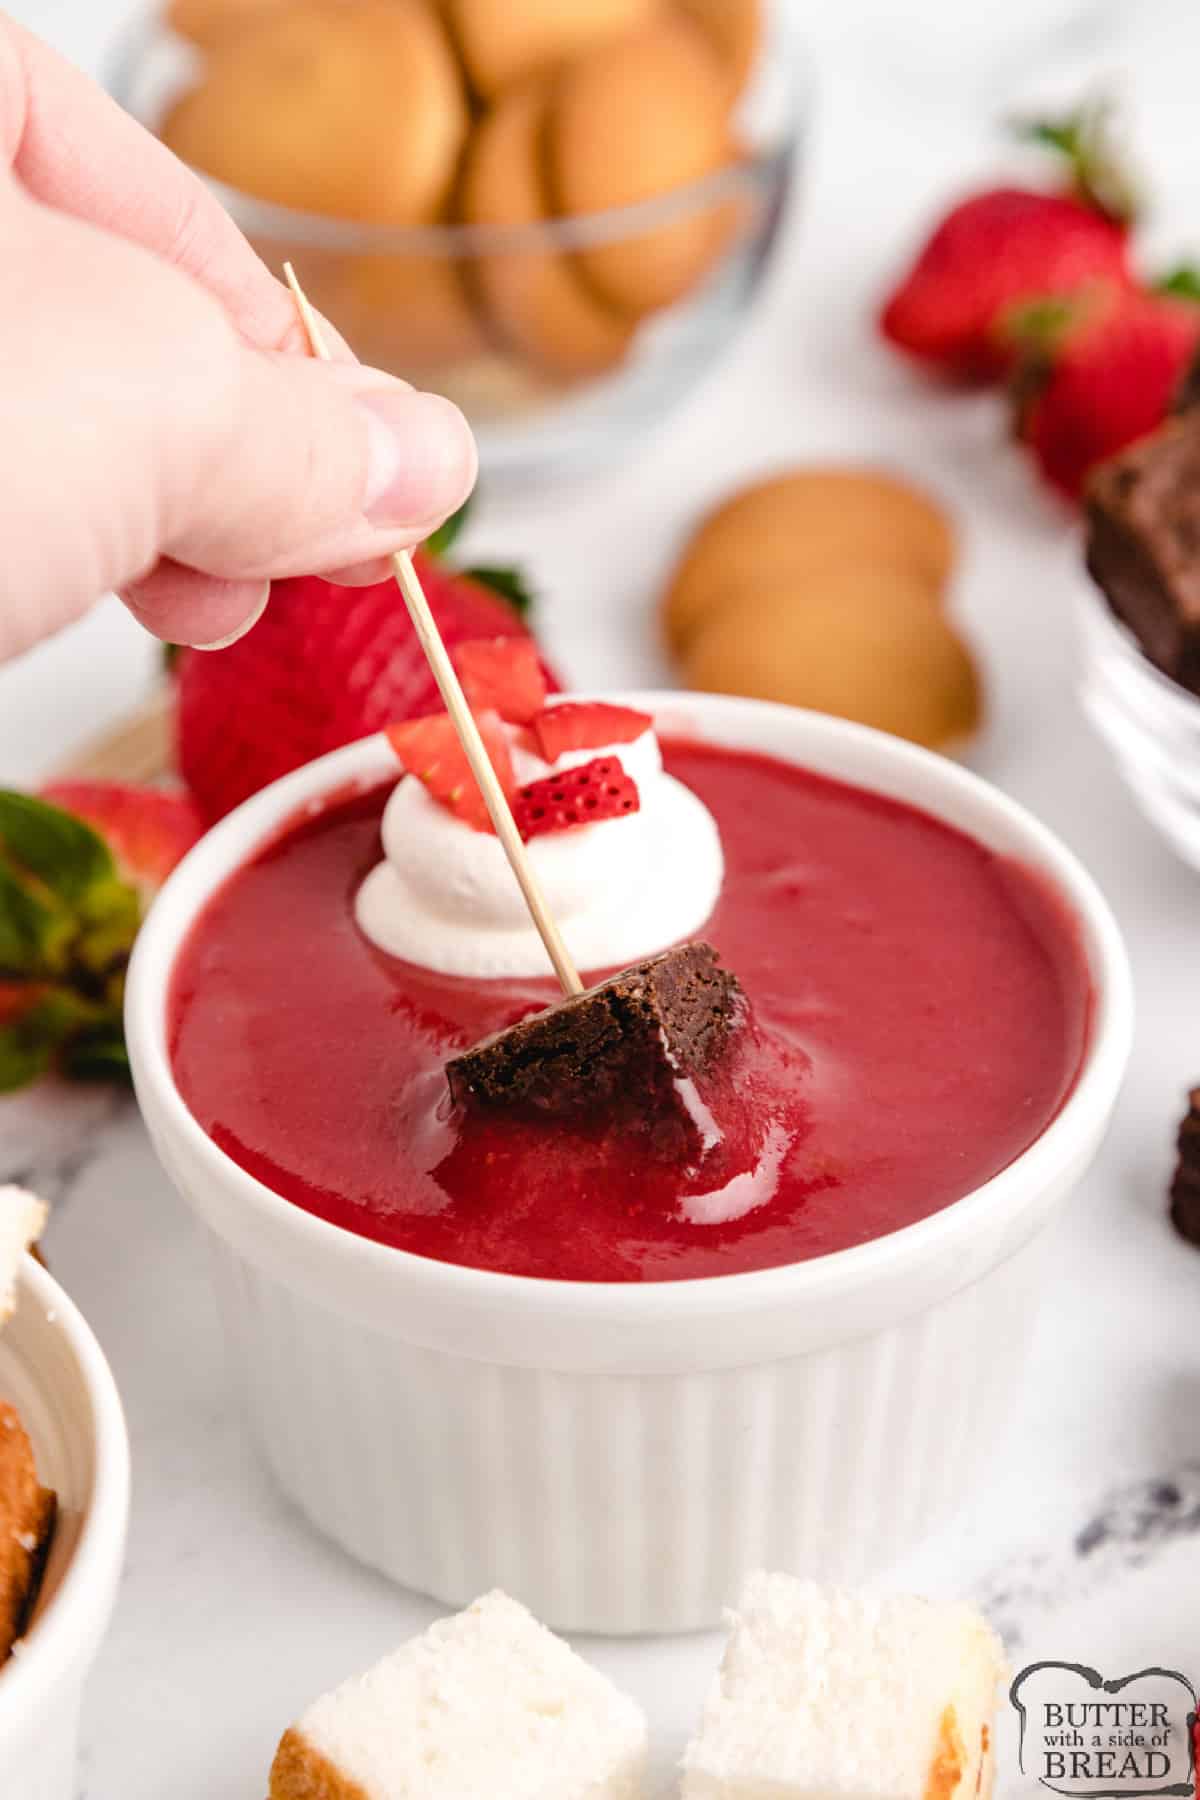 Strawberry dipping sauce